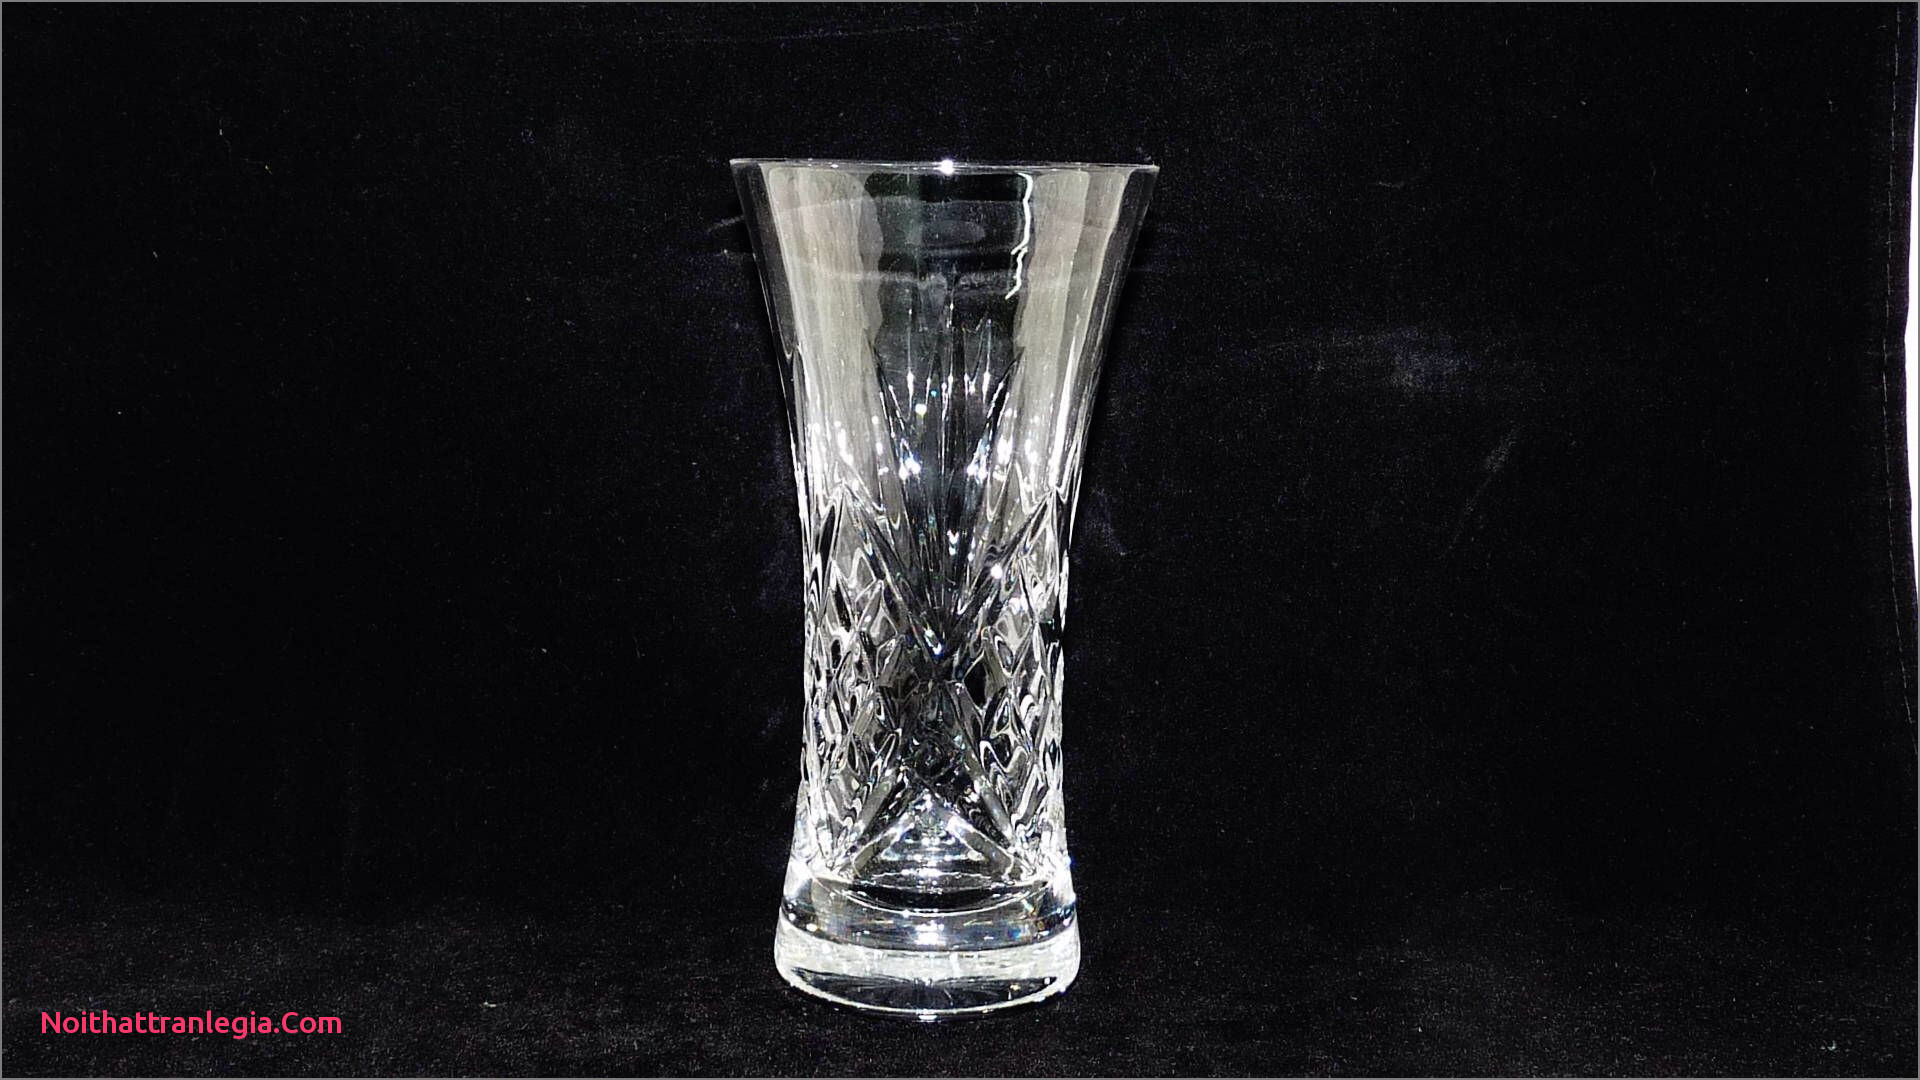 9 cylinder vase bulk of 20 cut glass antique vase noithattranlegia vases design inside excited to share the latest addition to my etsy shop small glass vase